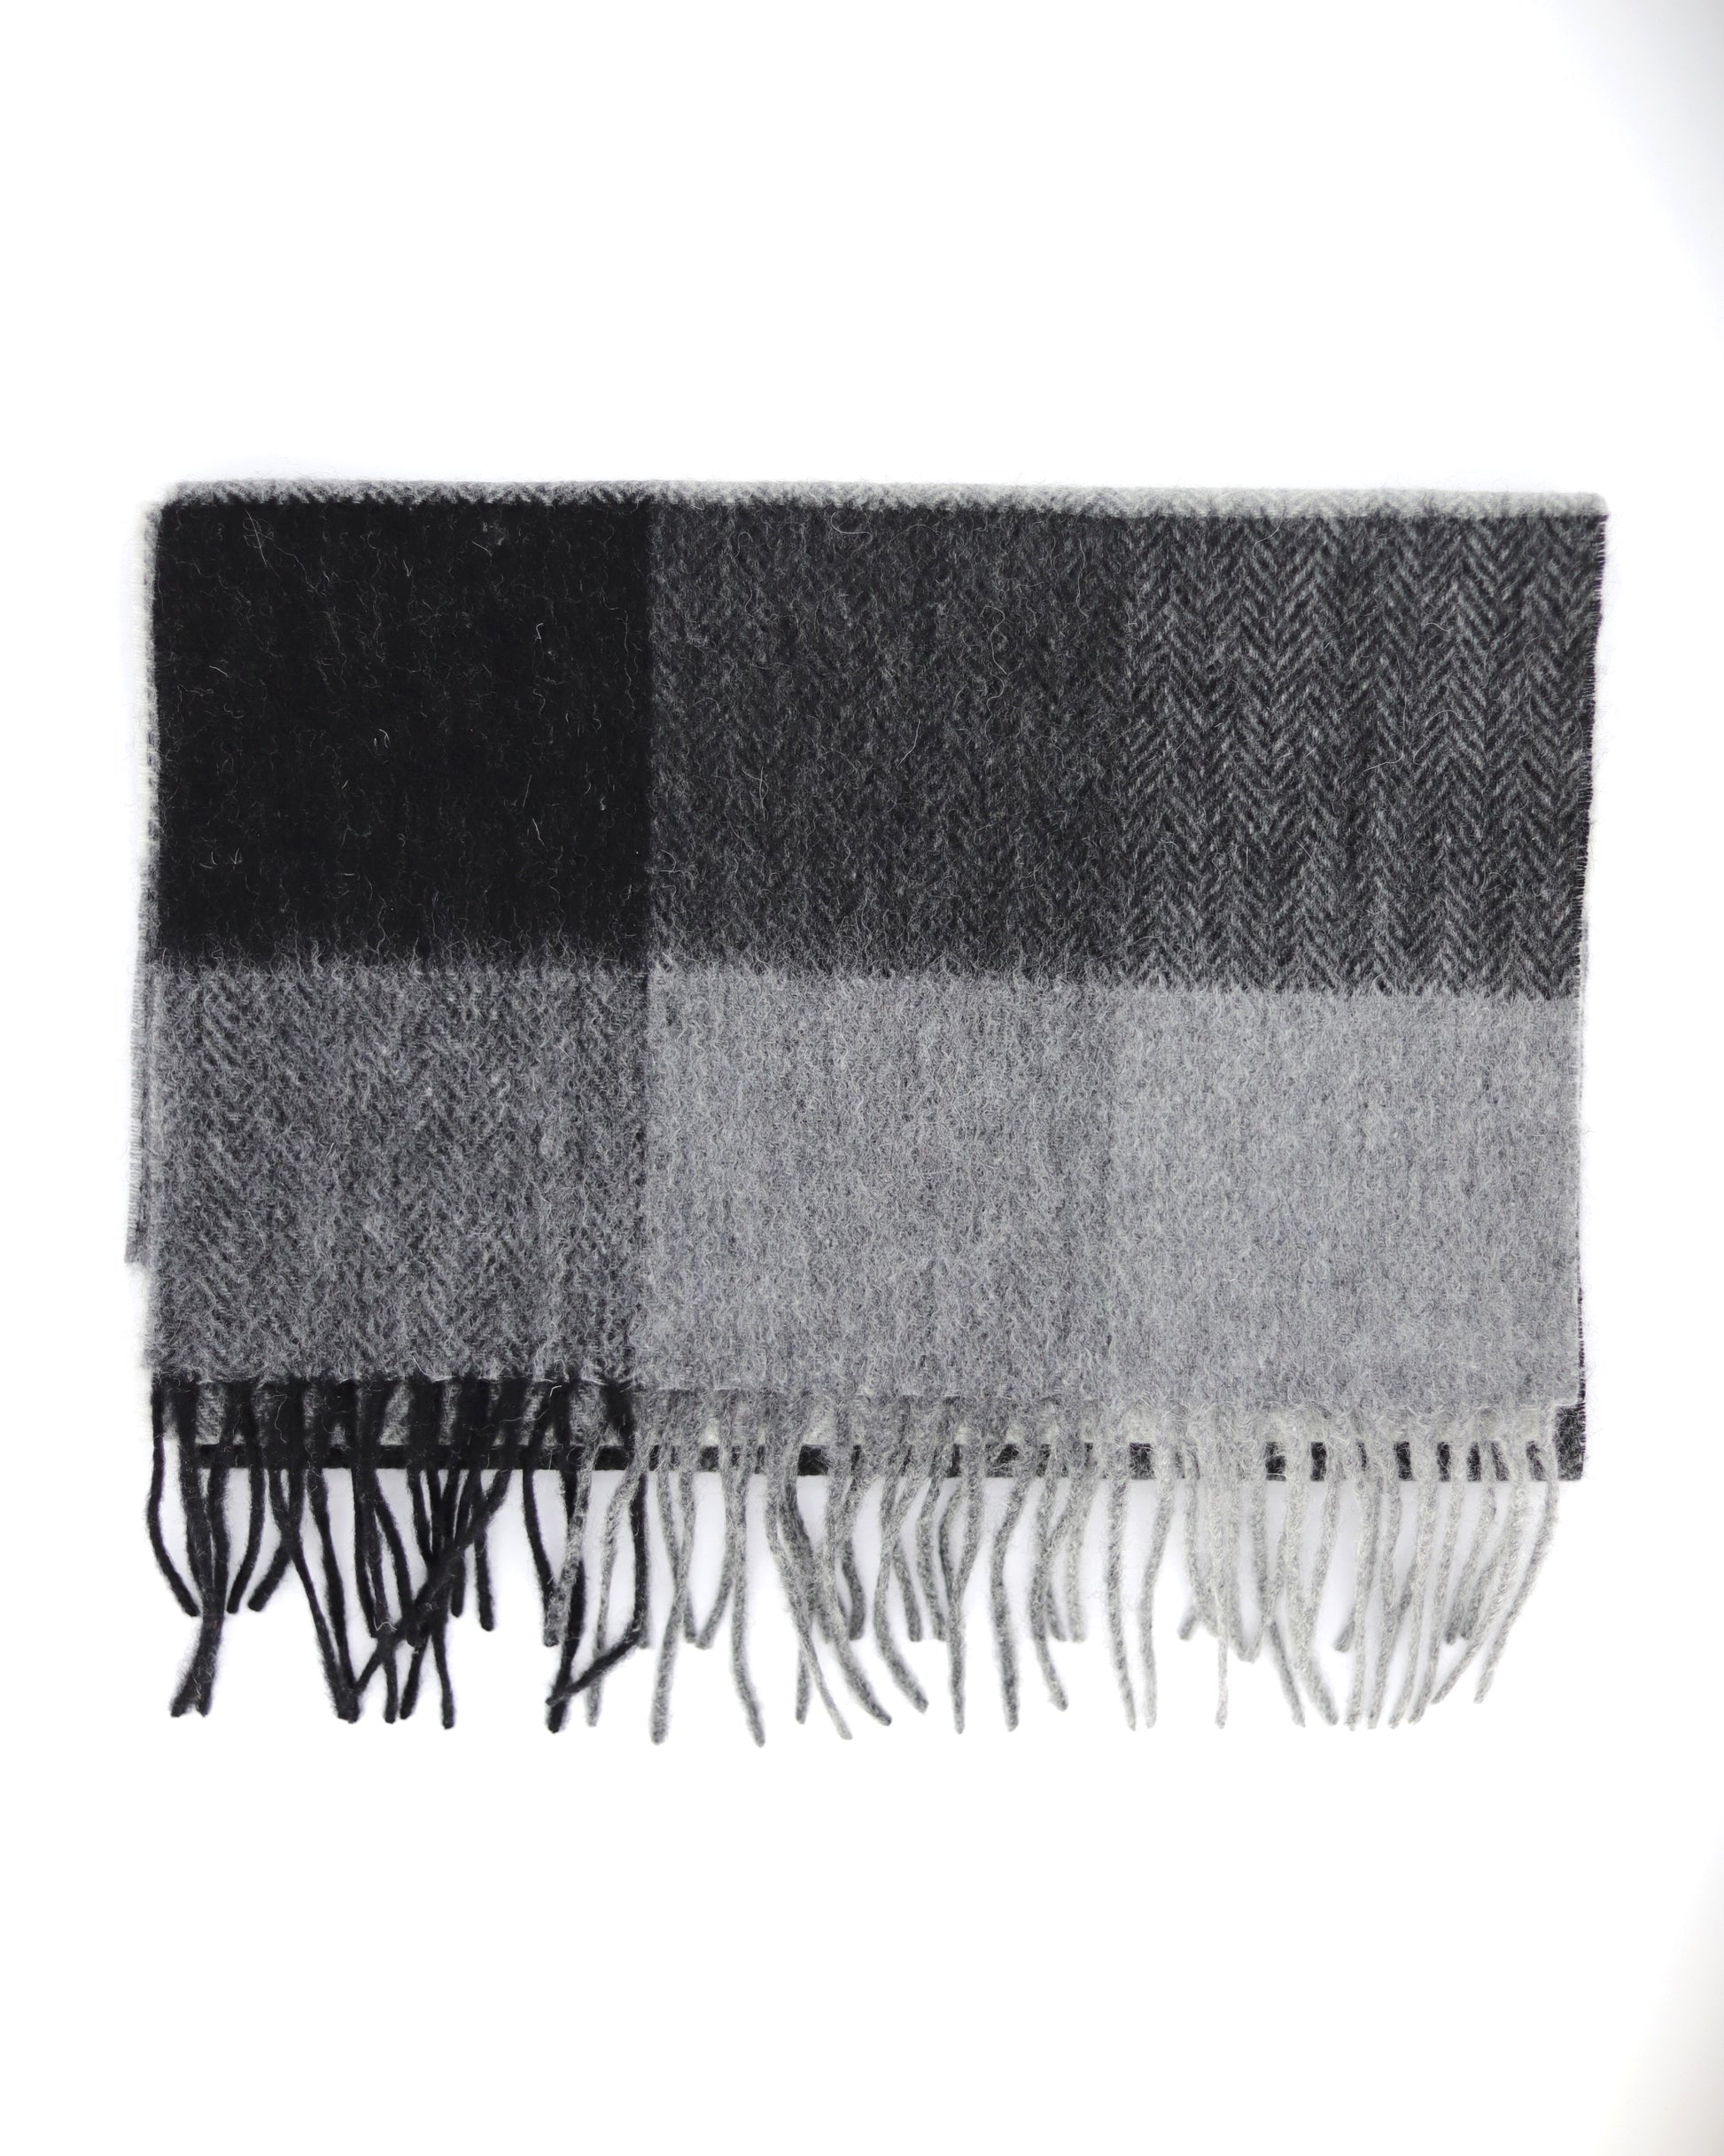 This Scarf is a finest 100% natural Australian wool scarf in a classic checked pattern from Villanelle. A luxurious accessory for women and for men and made from the softest natural wool for extreme comfort and warmth. It is made in a trendy combination of grey, black and creamy color. This product is sourced in Australia and manufactured in Poland.